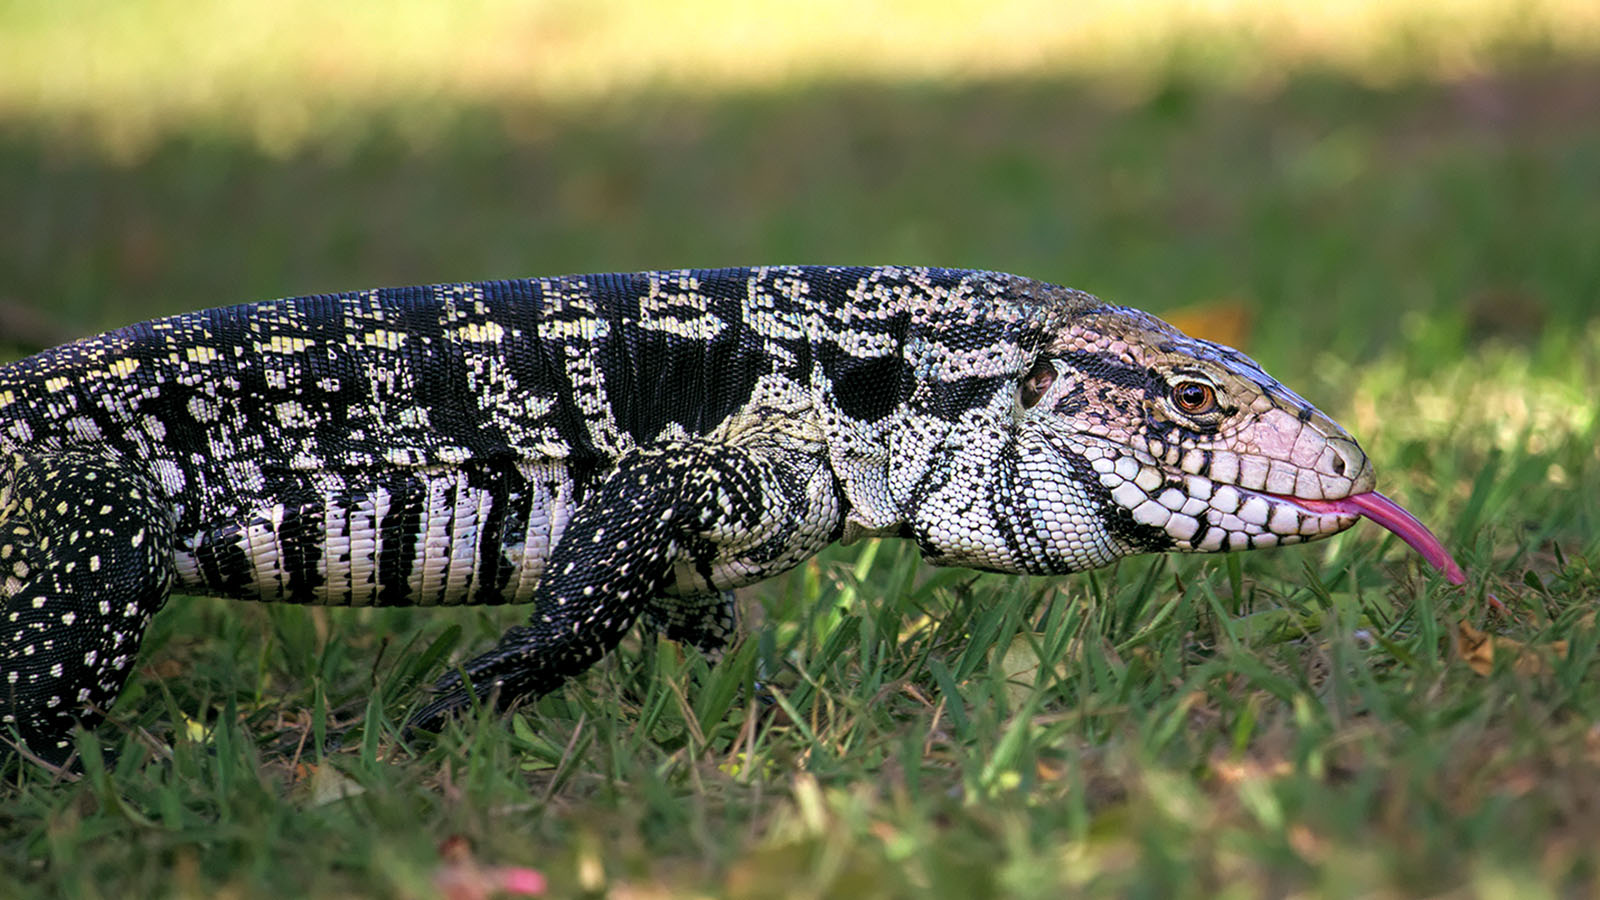 Argentine black and white tegu (Image by Shutterstock)